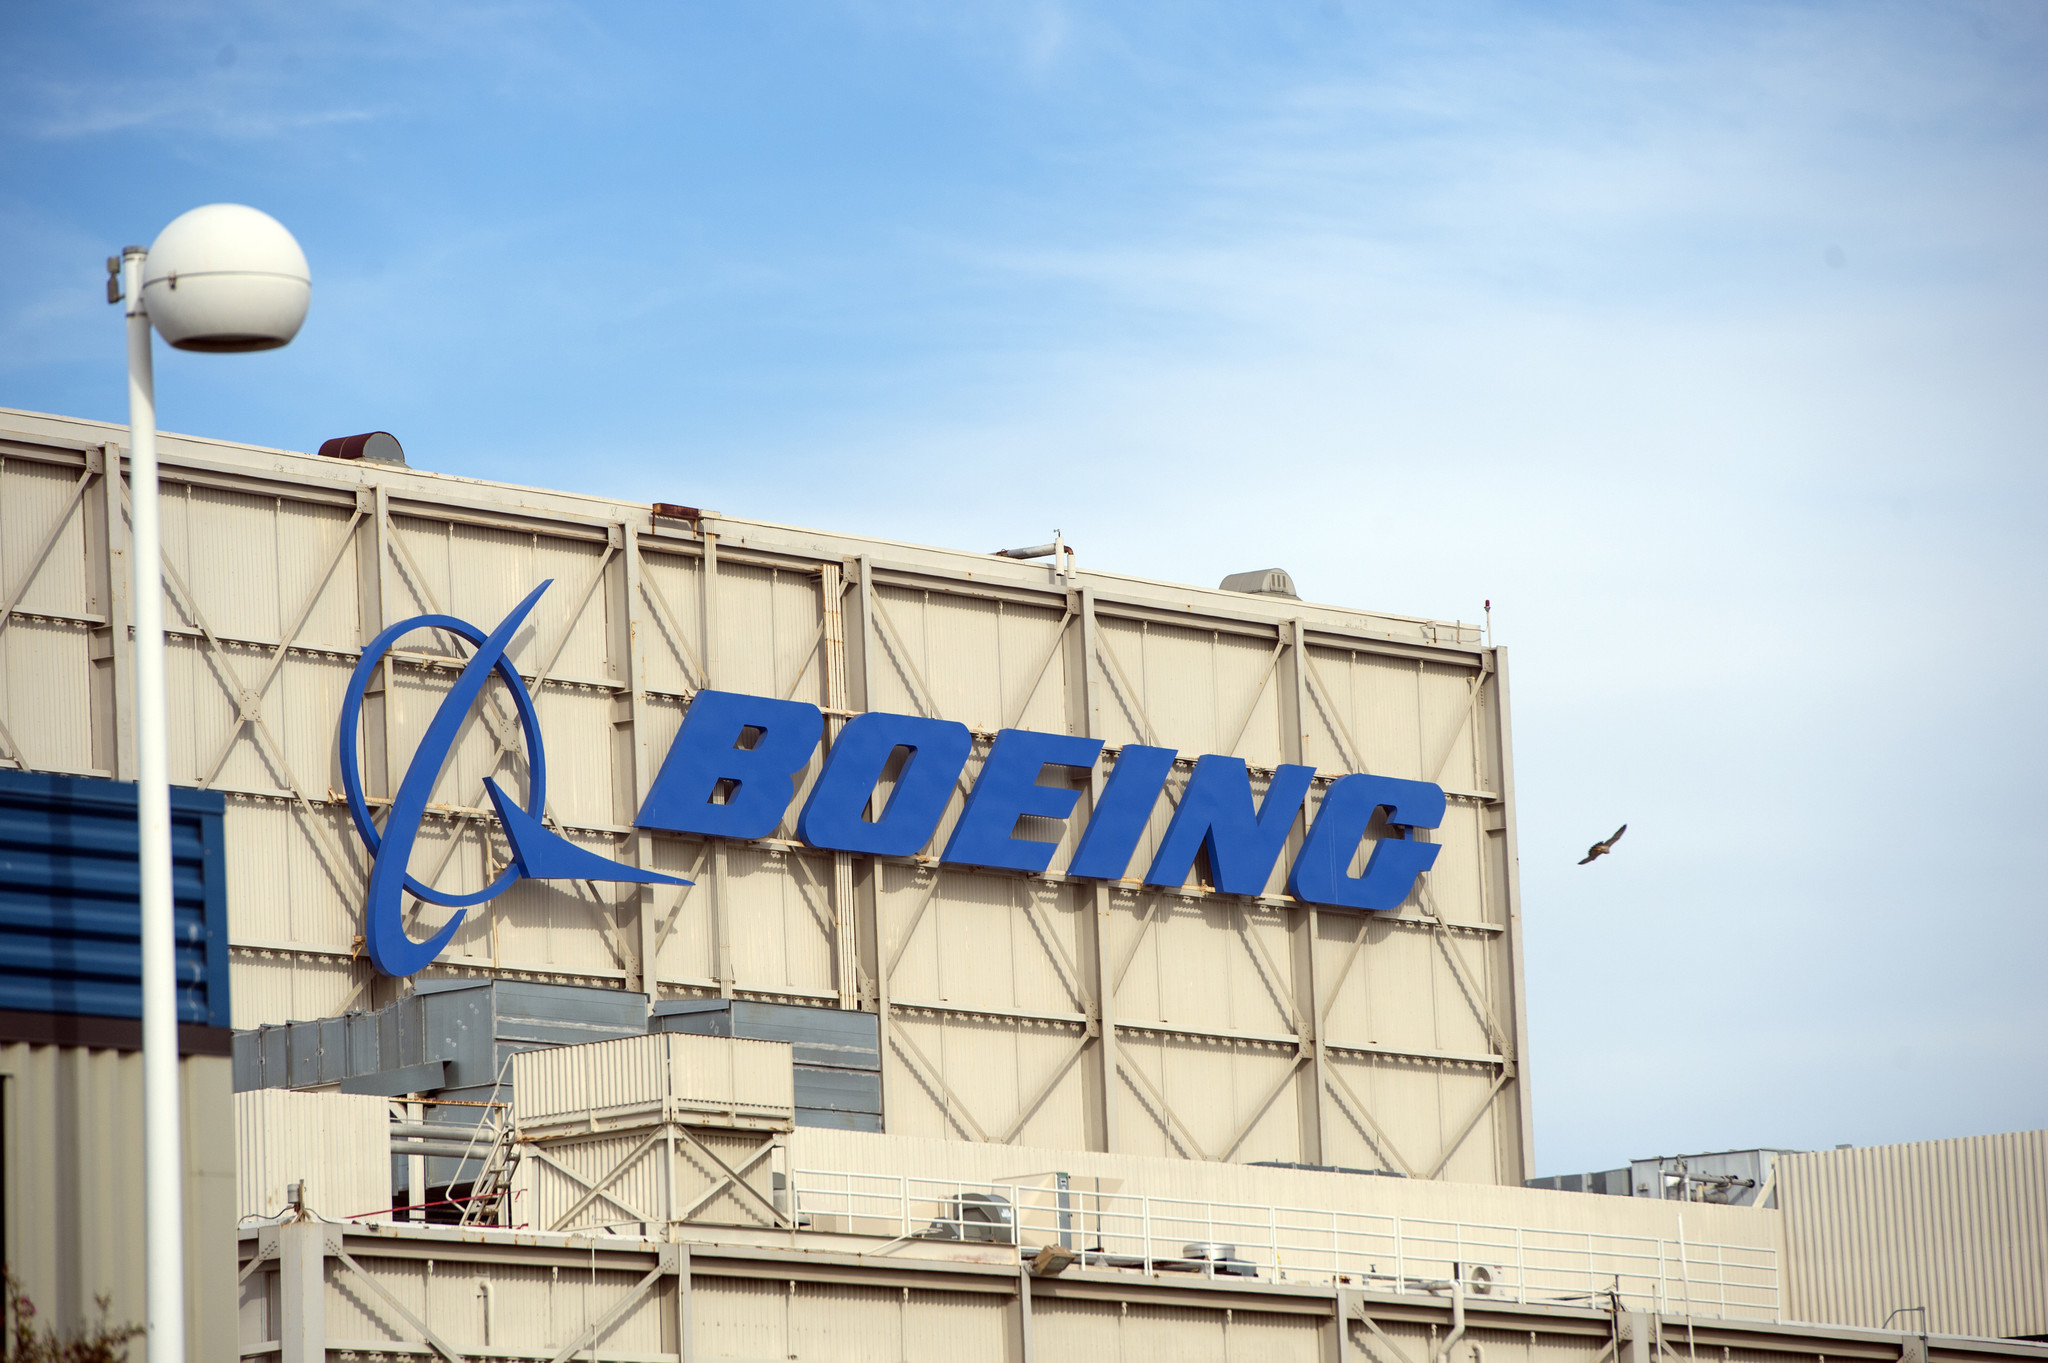 Boeing will cut 500 jobs, move others, in efficiency effort Lehigh